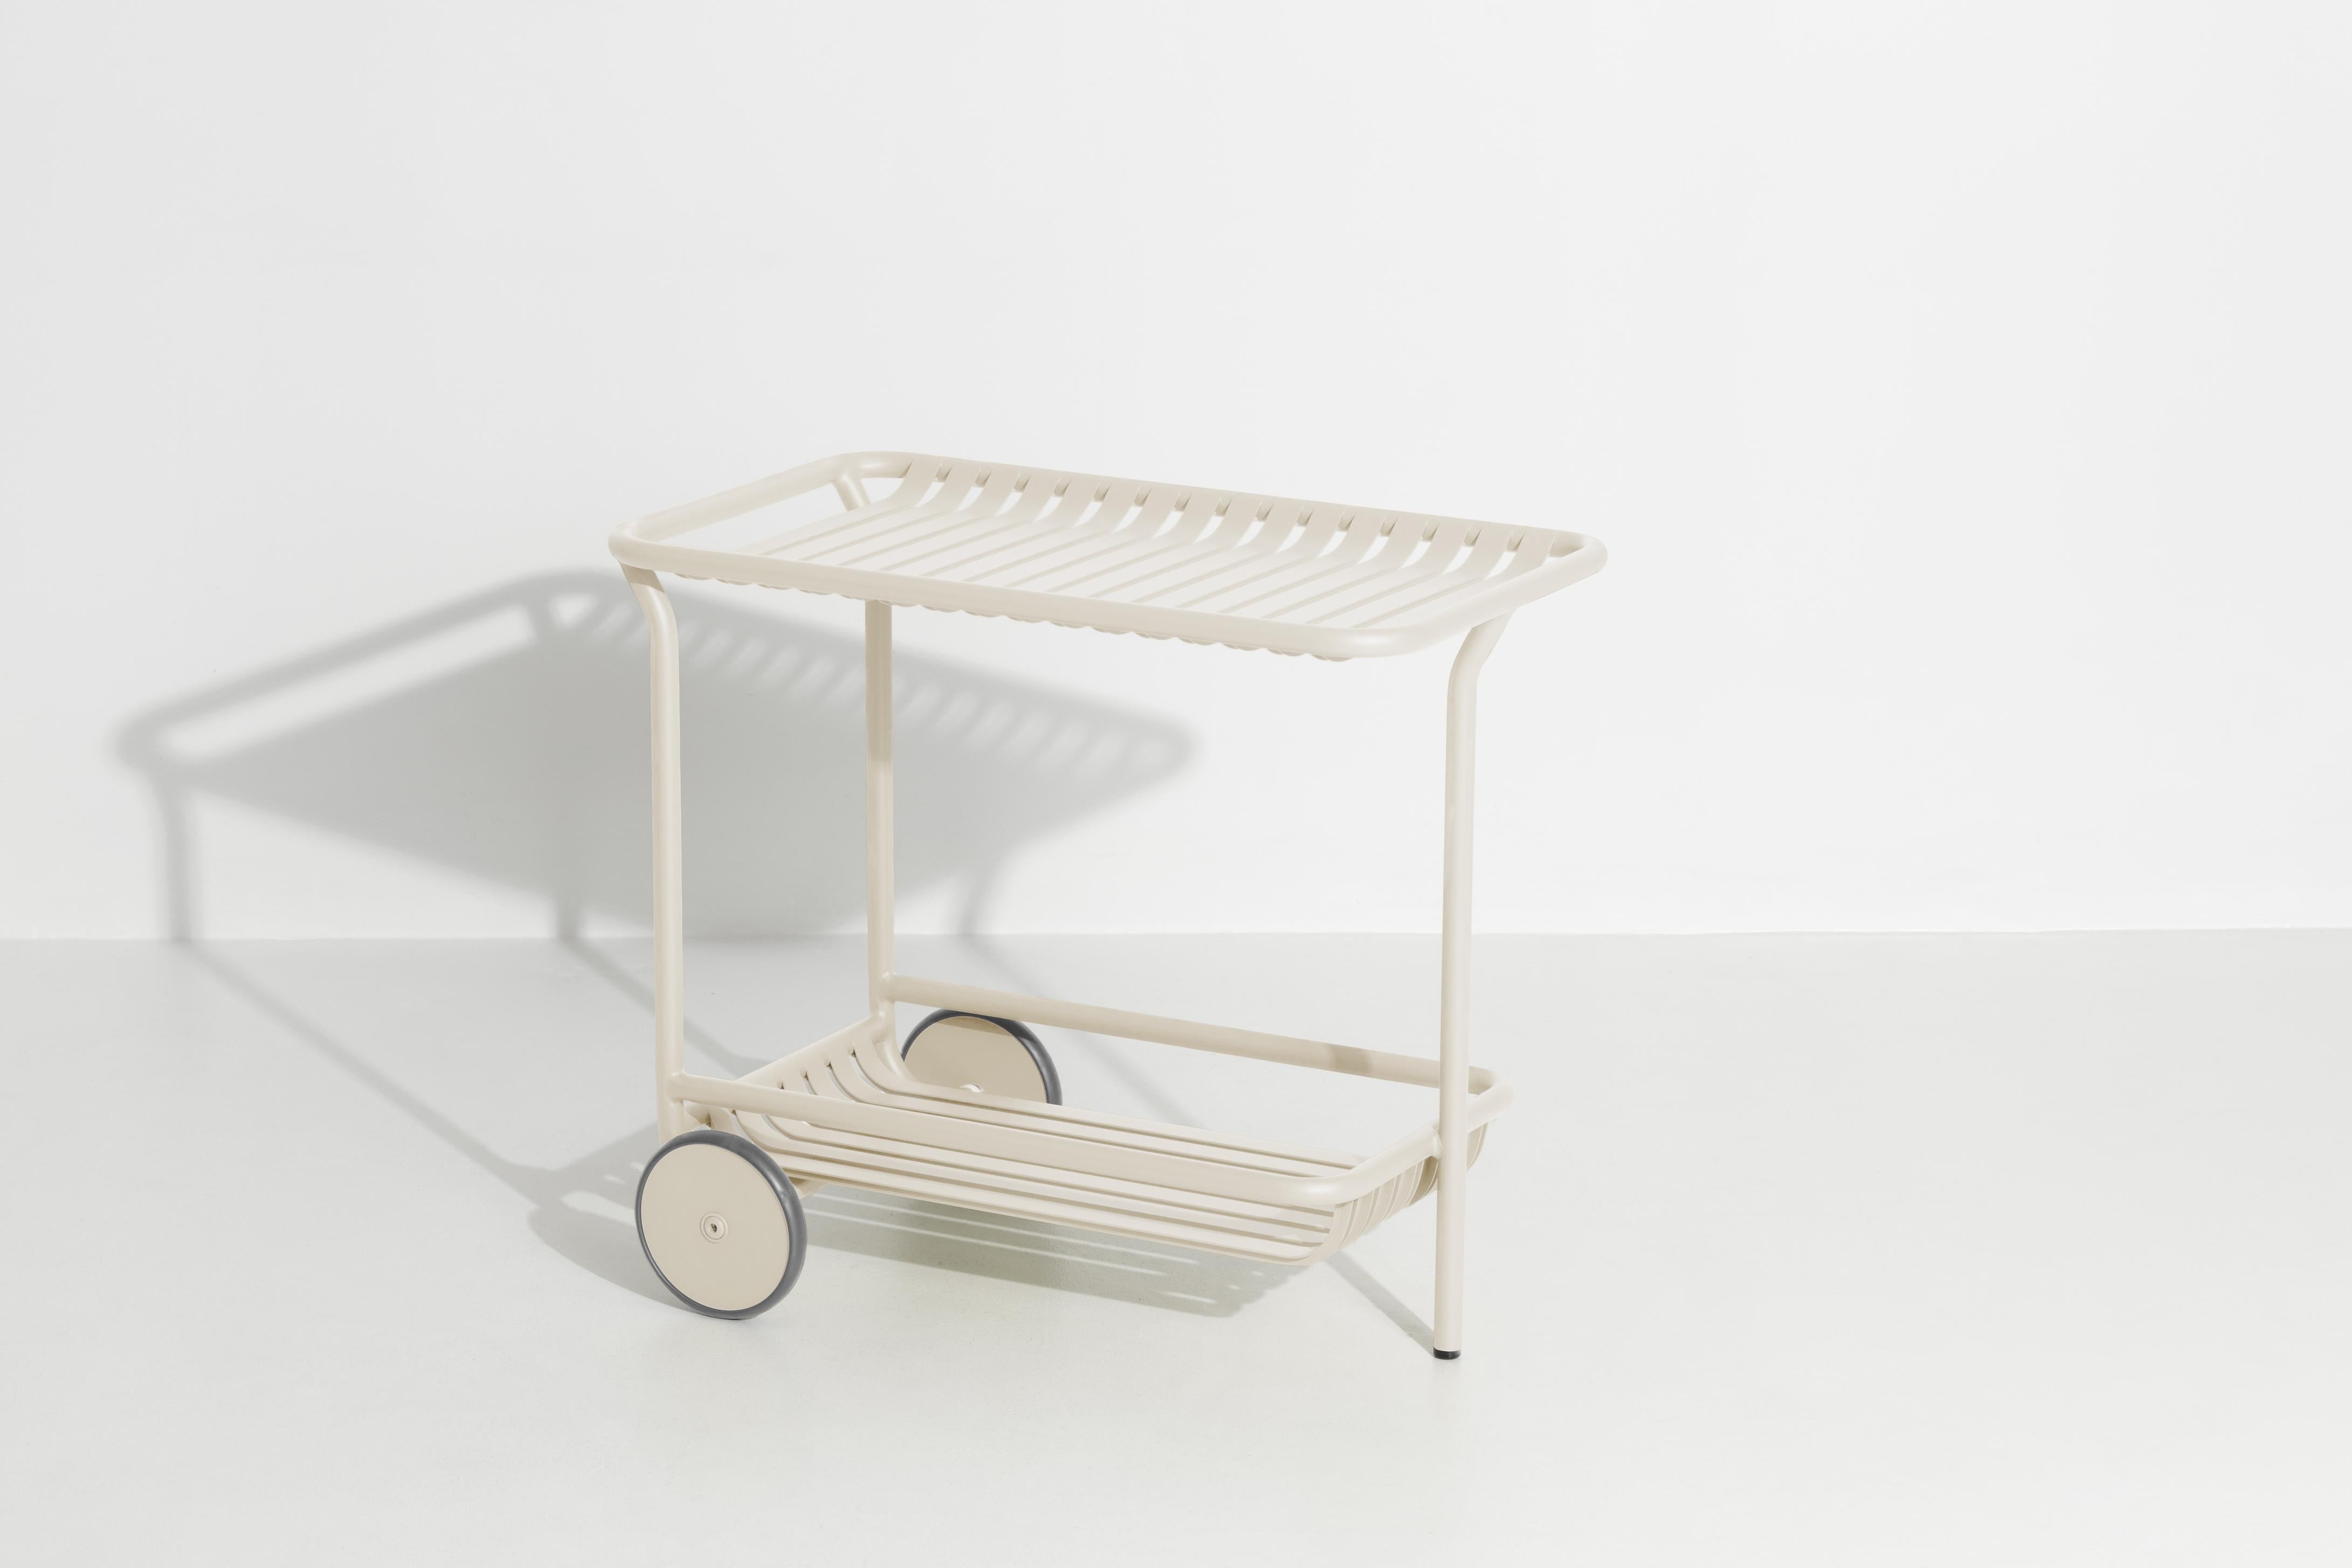 Petite Friture Week-End Trolley in Ivory Aluminium by Studio BrichetZiegler, 2017

The week-end collection is a full range of outdoor furniture, in aluminium grained epoxy paint, matt finish, that includes 18 functions and 8 colours for the retail